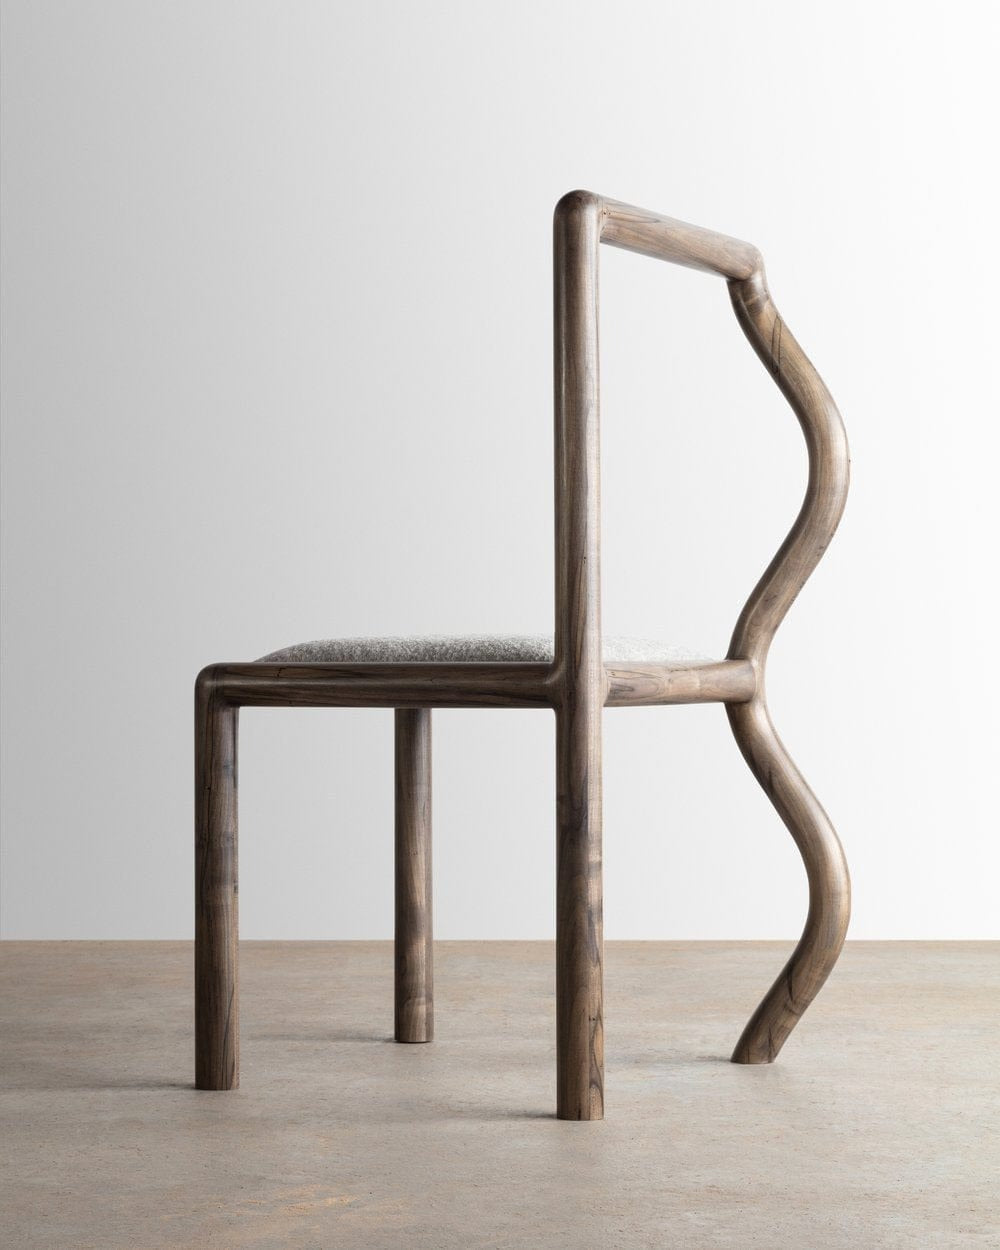 Squiggle Chair in Oxidized Maple Chairs